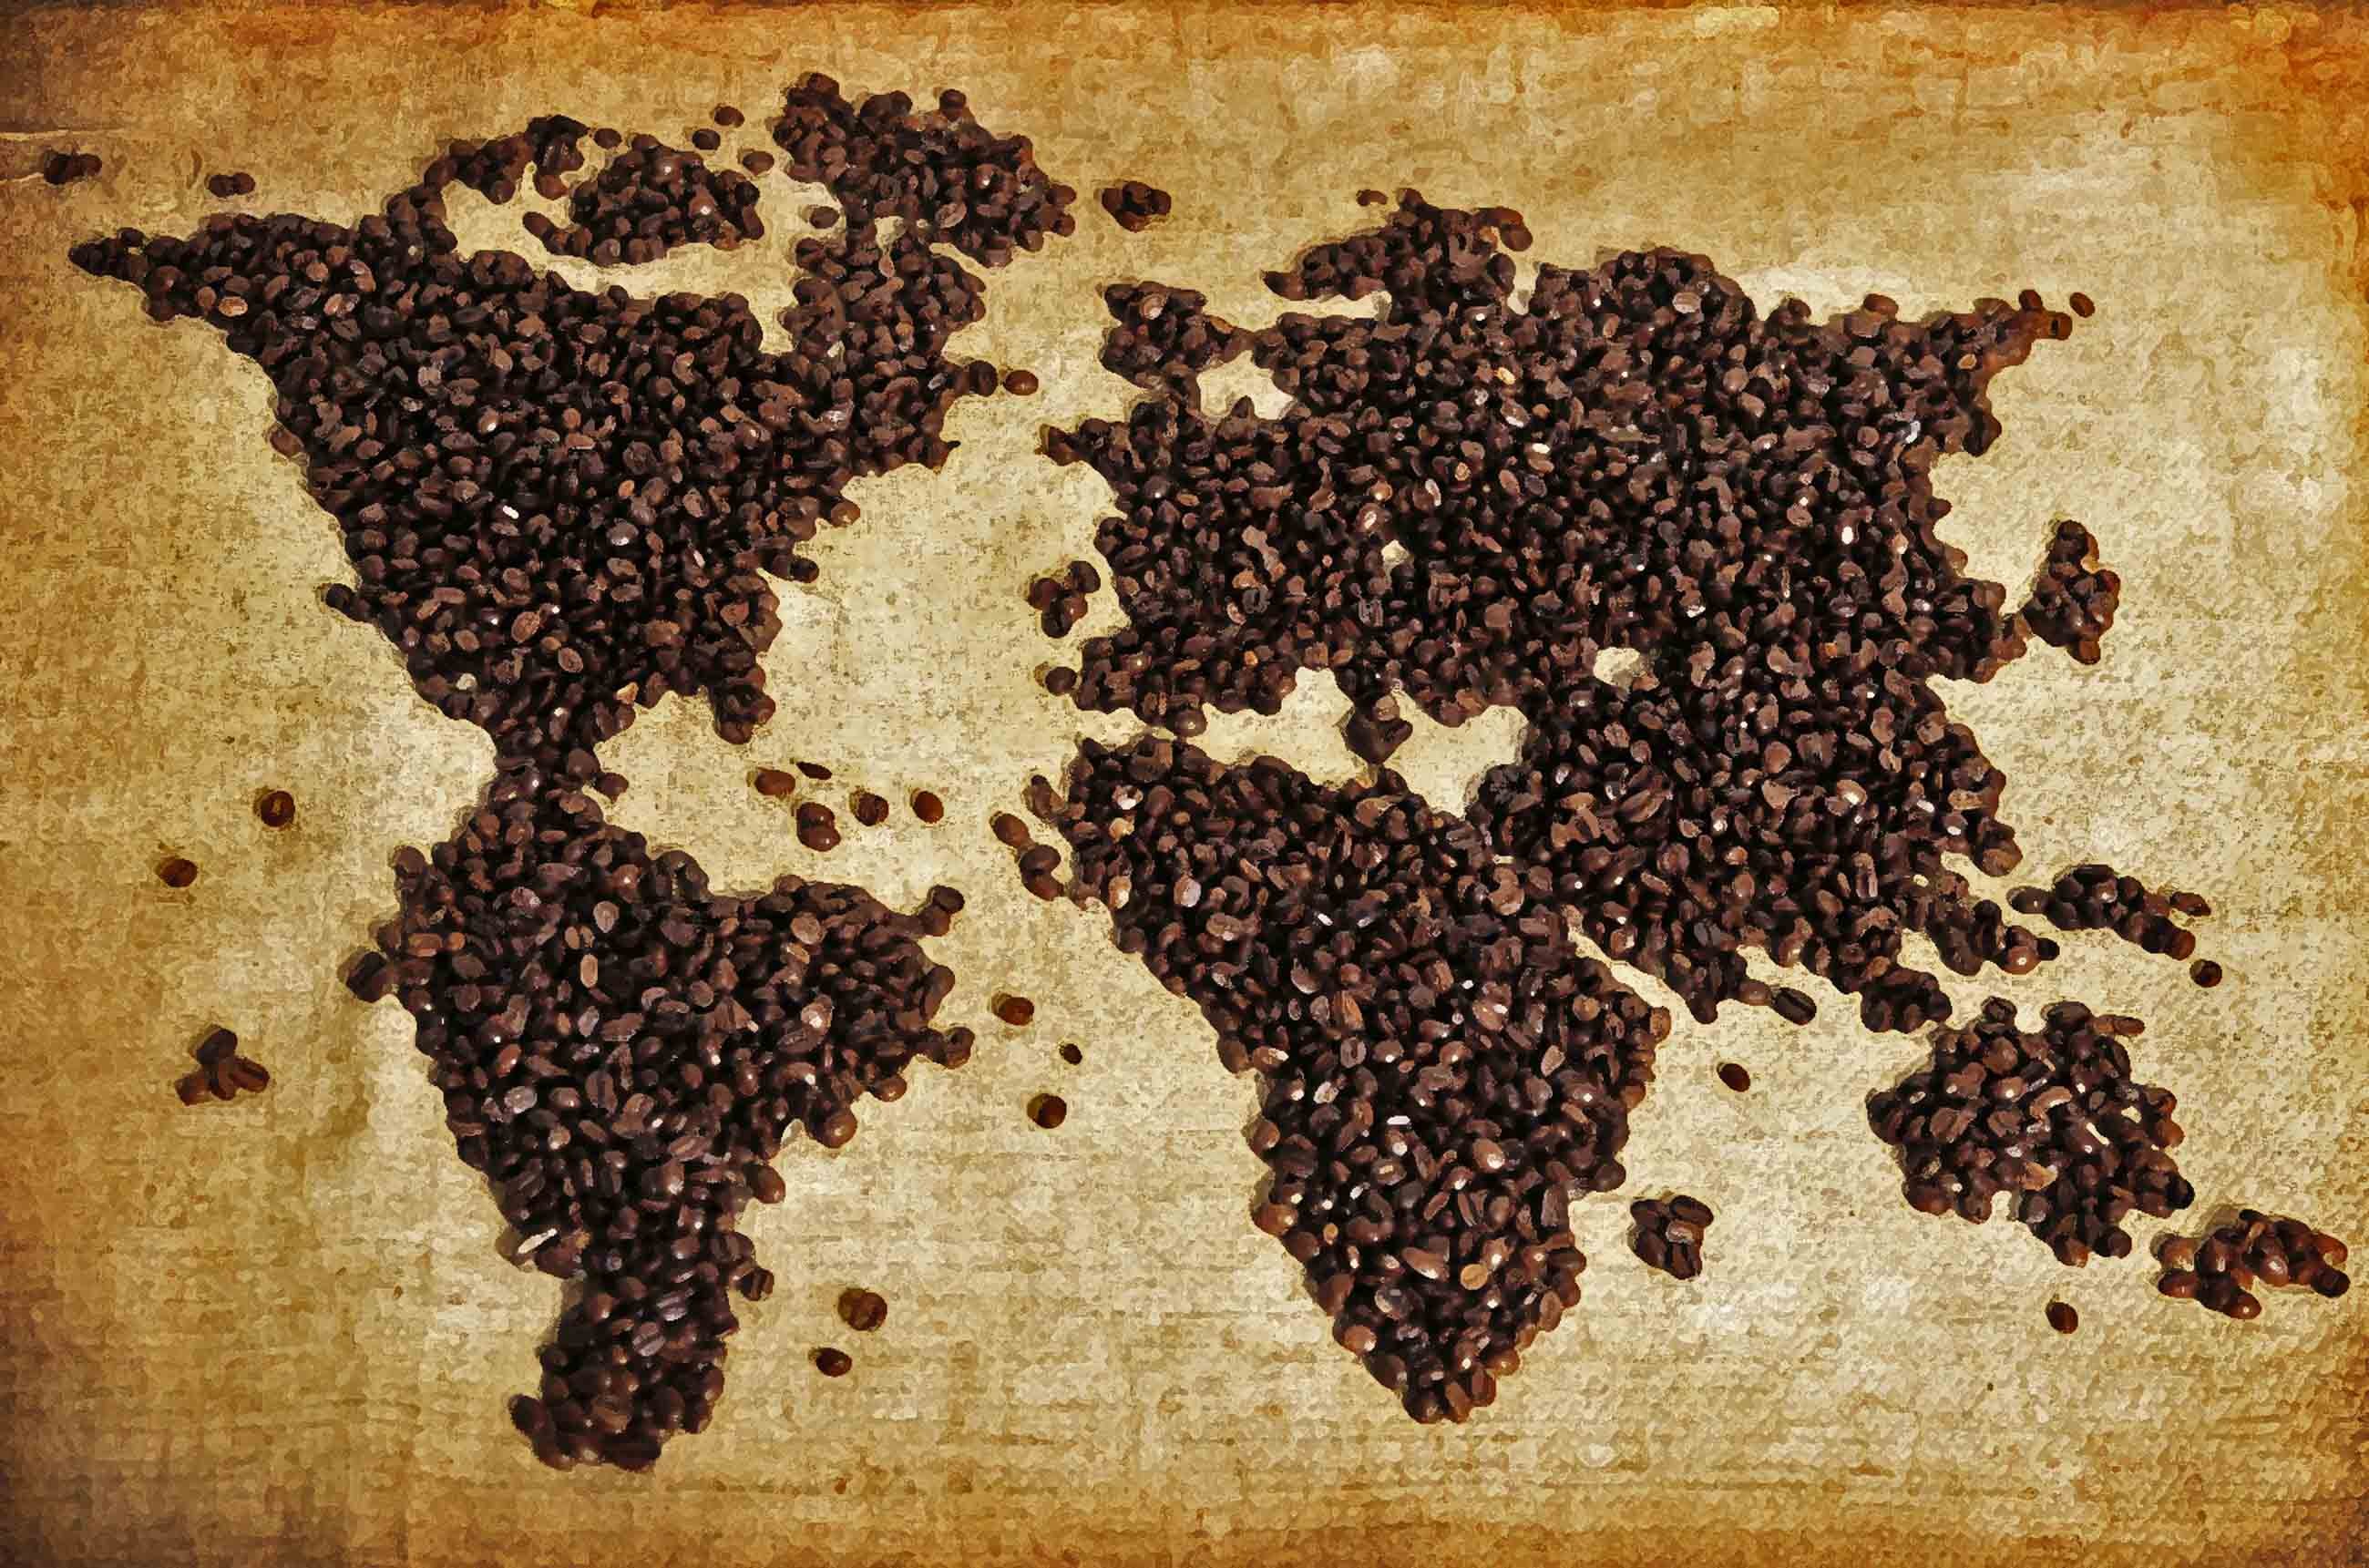 General 2600x1721 coffee map brown world map coffee beans food